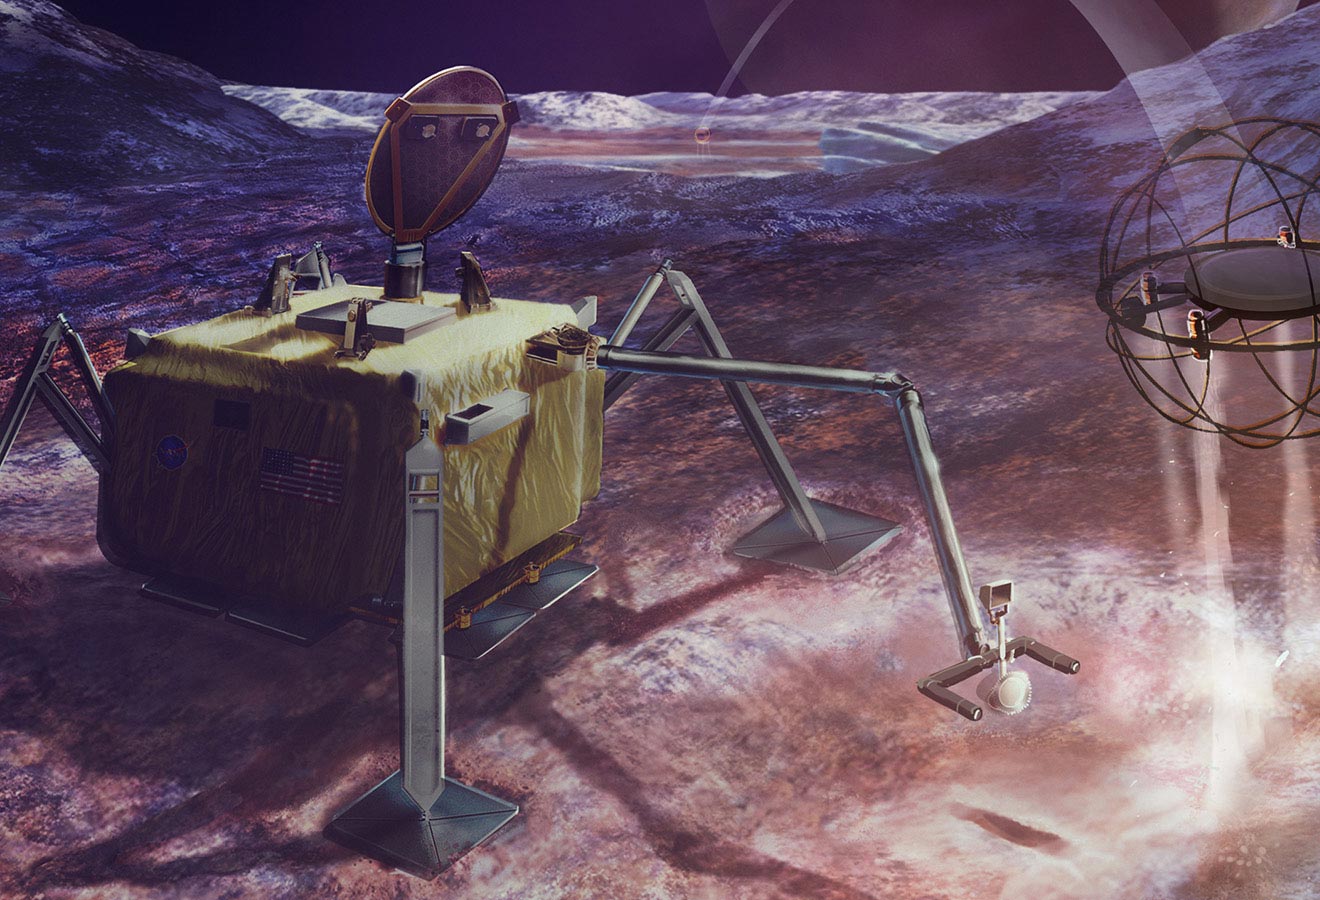 This Steam-Powered Hopping Robot From NASA Could Explore the Solar System’s Icy Moons